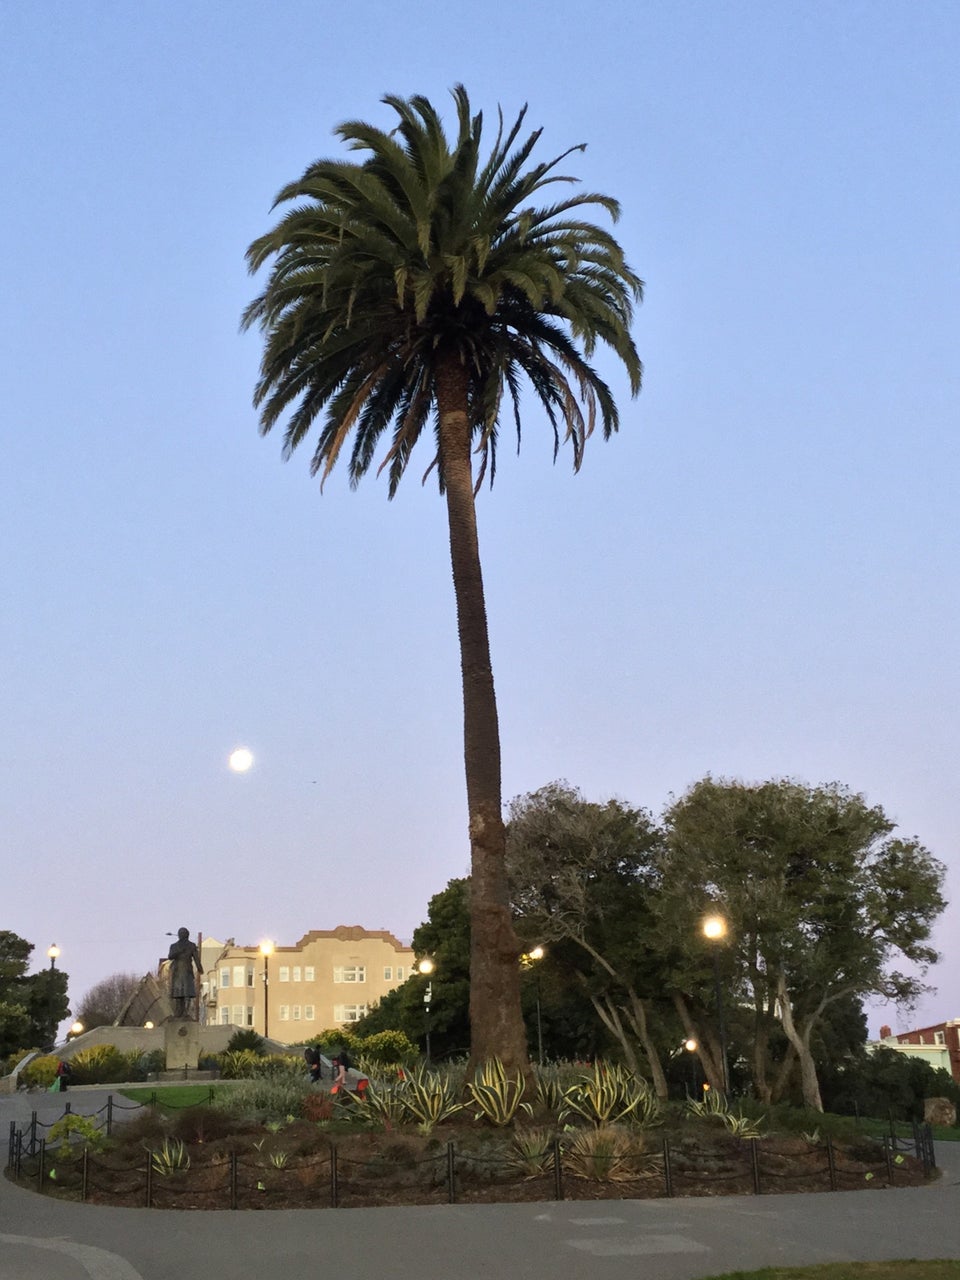 Tall palm tree with the moon behind it against a bluish purple pre-dawn sky with a statue, apartment building, and a few trees in the background, a dirt bed of various succulents at the base of the palm tree.